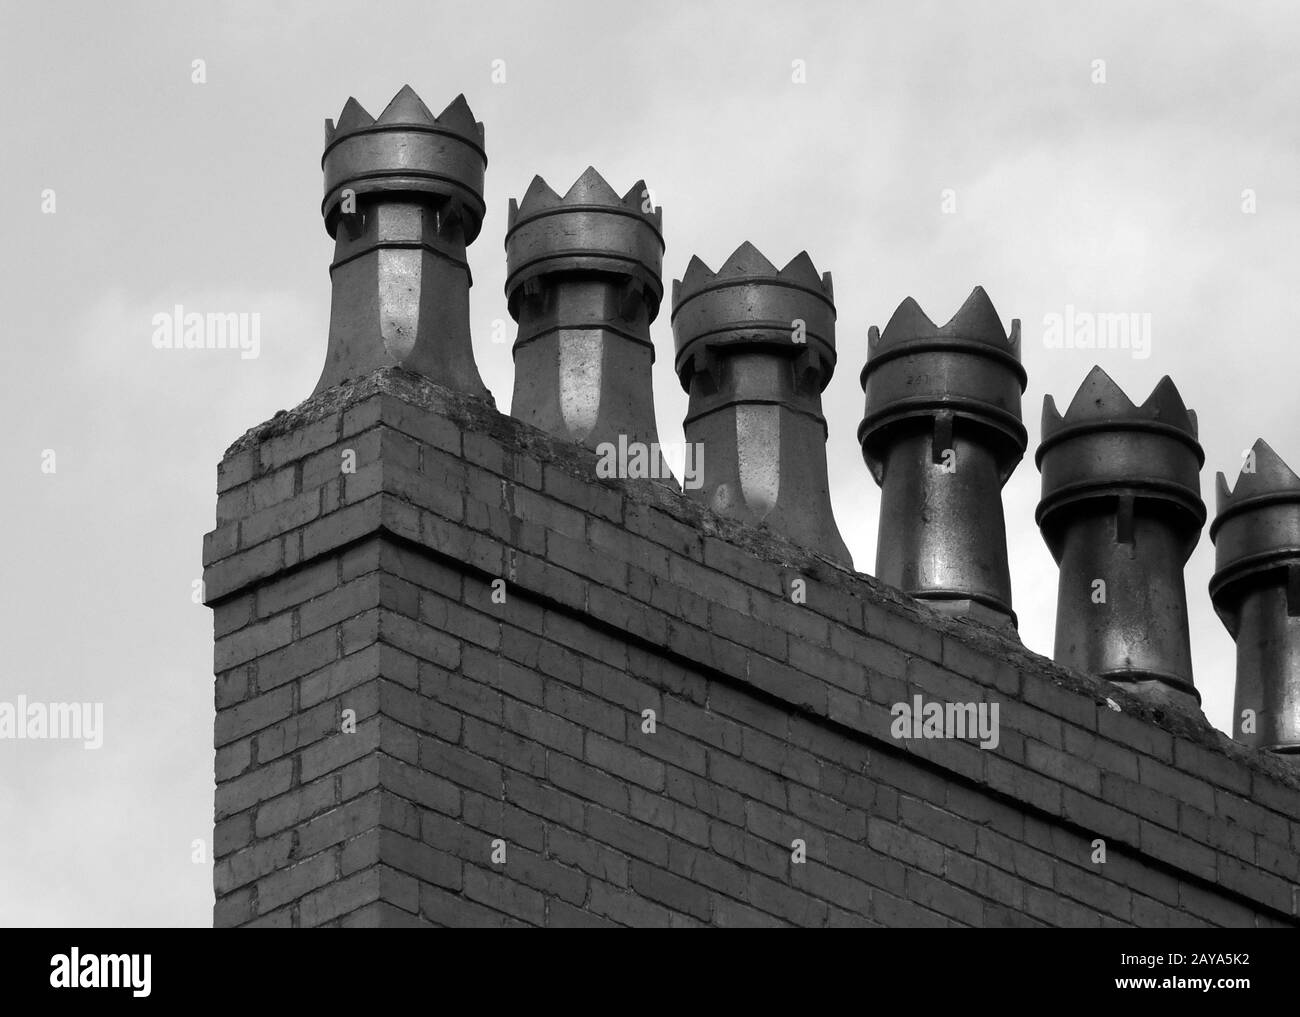 monochrome image of a row old fashioned chimney pots on a brick built house Stock Photo